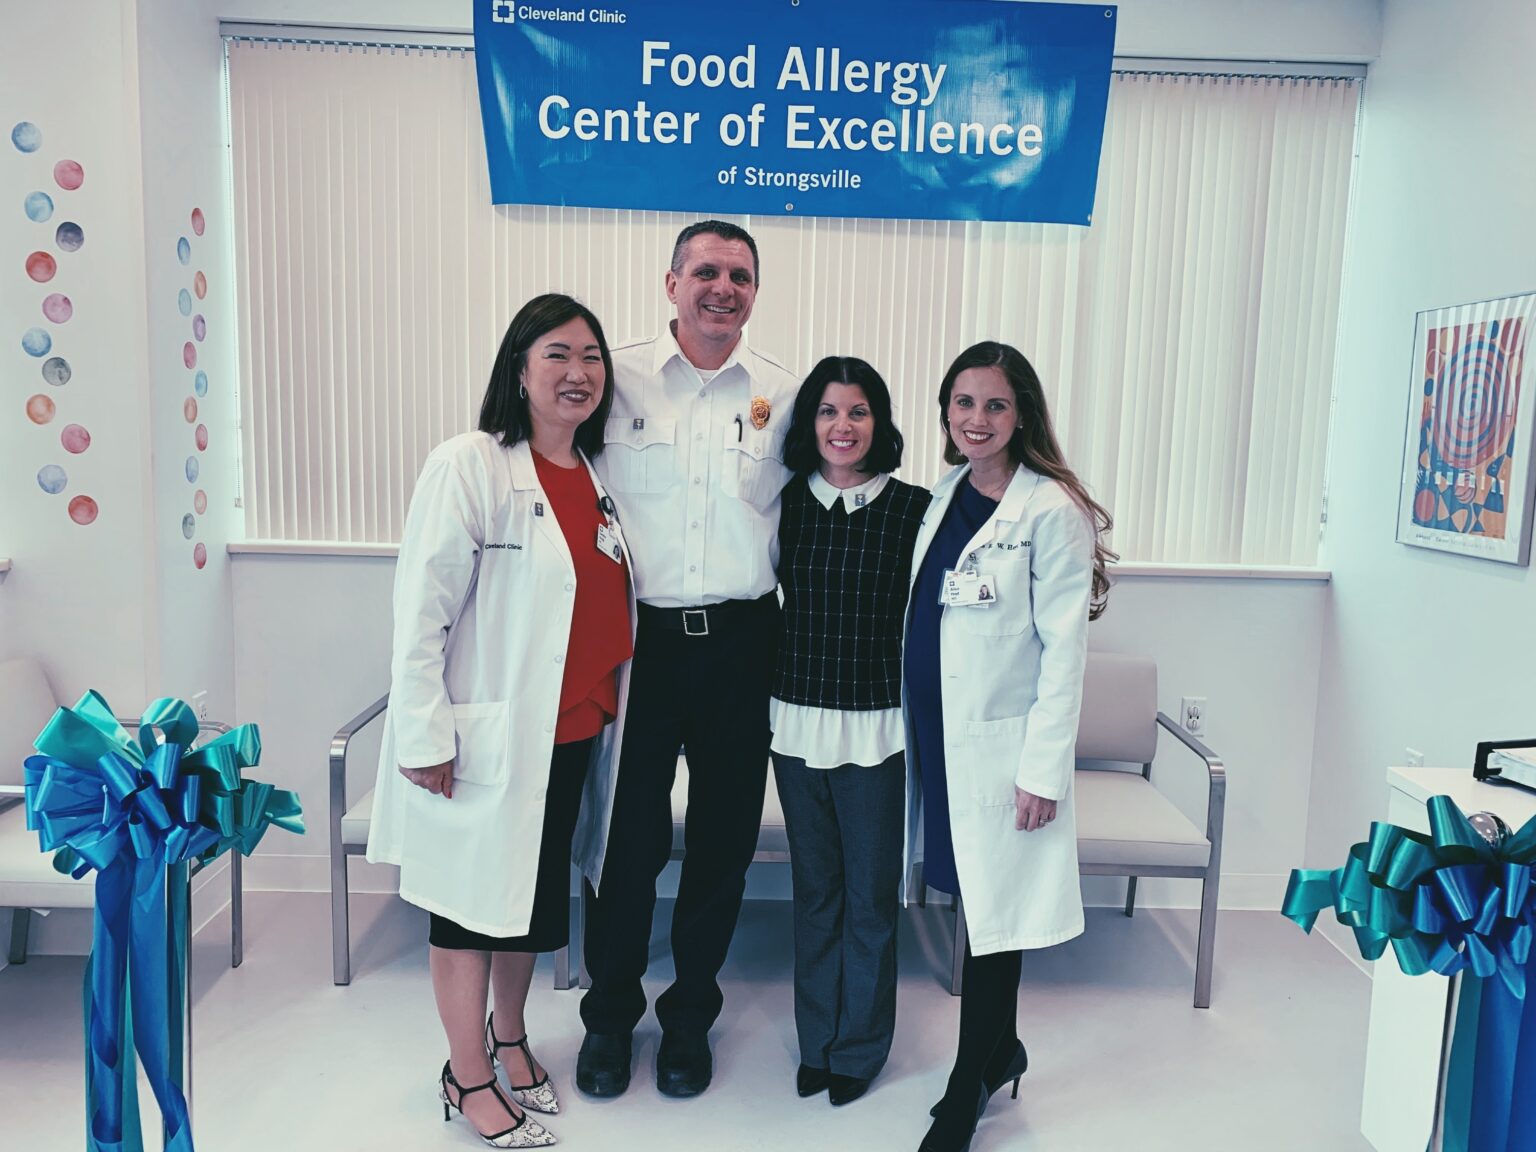 Cleveland Clinic Food Allergy Center of Excellence Observation